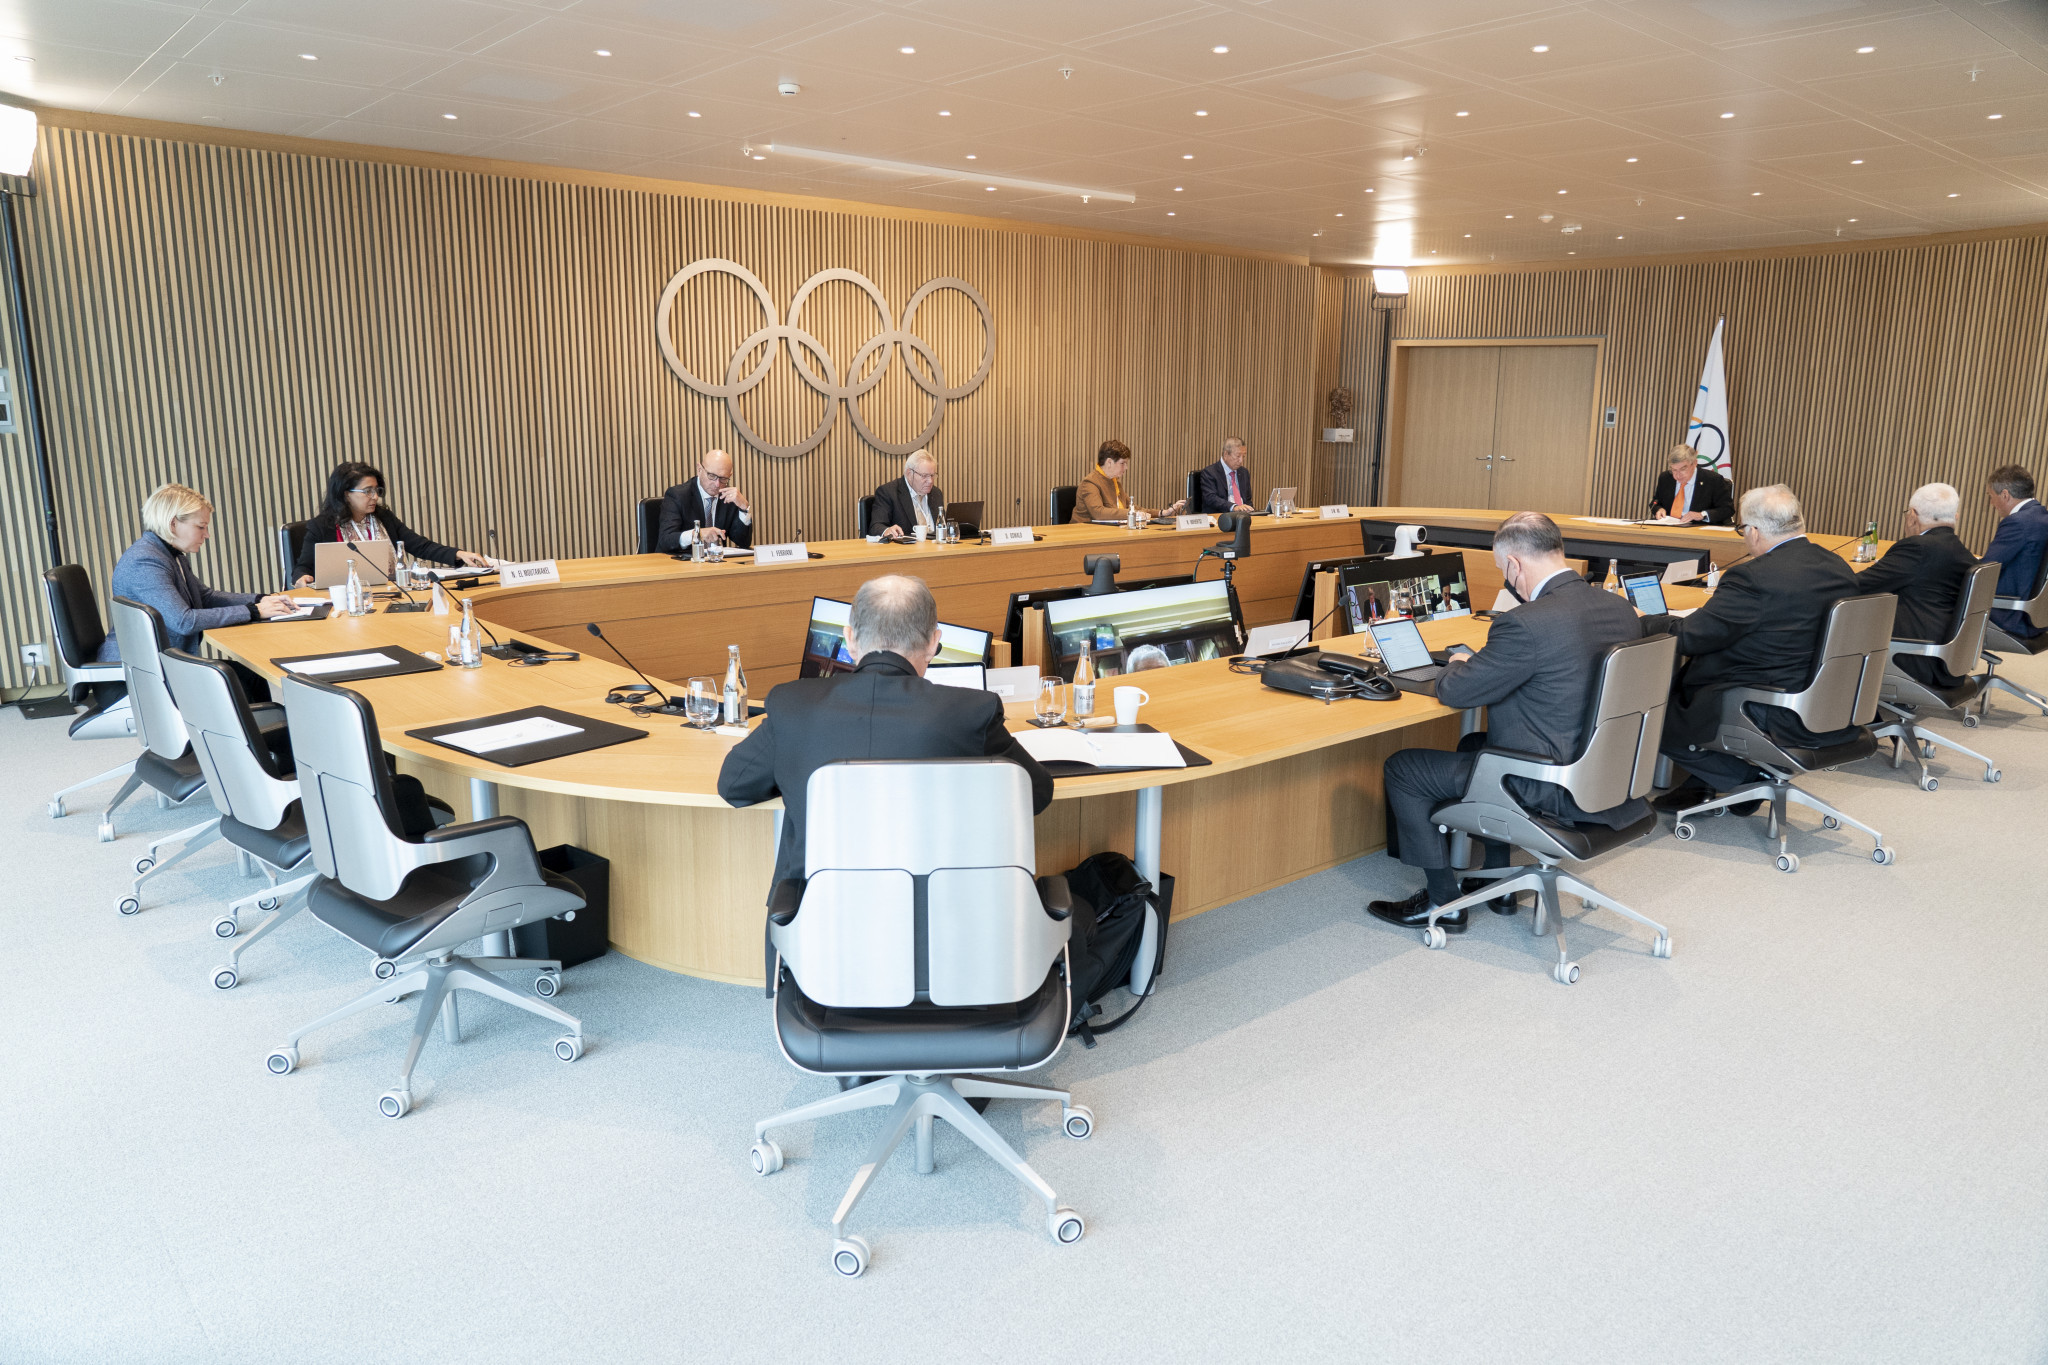 All 12 Beijing 2022 venues completed and approved by International Federations